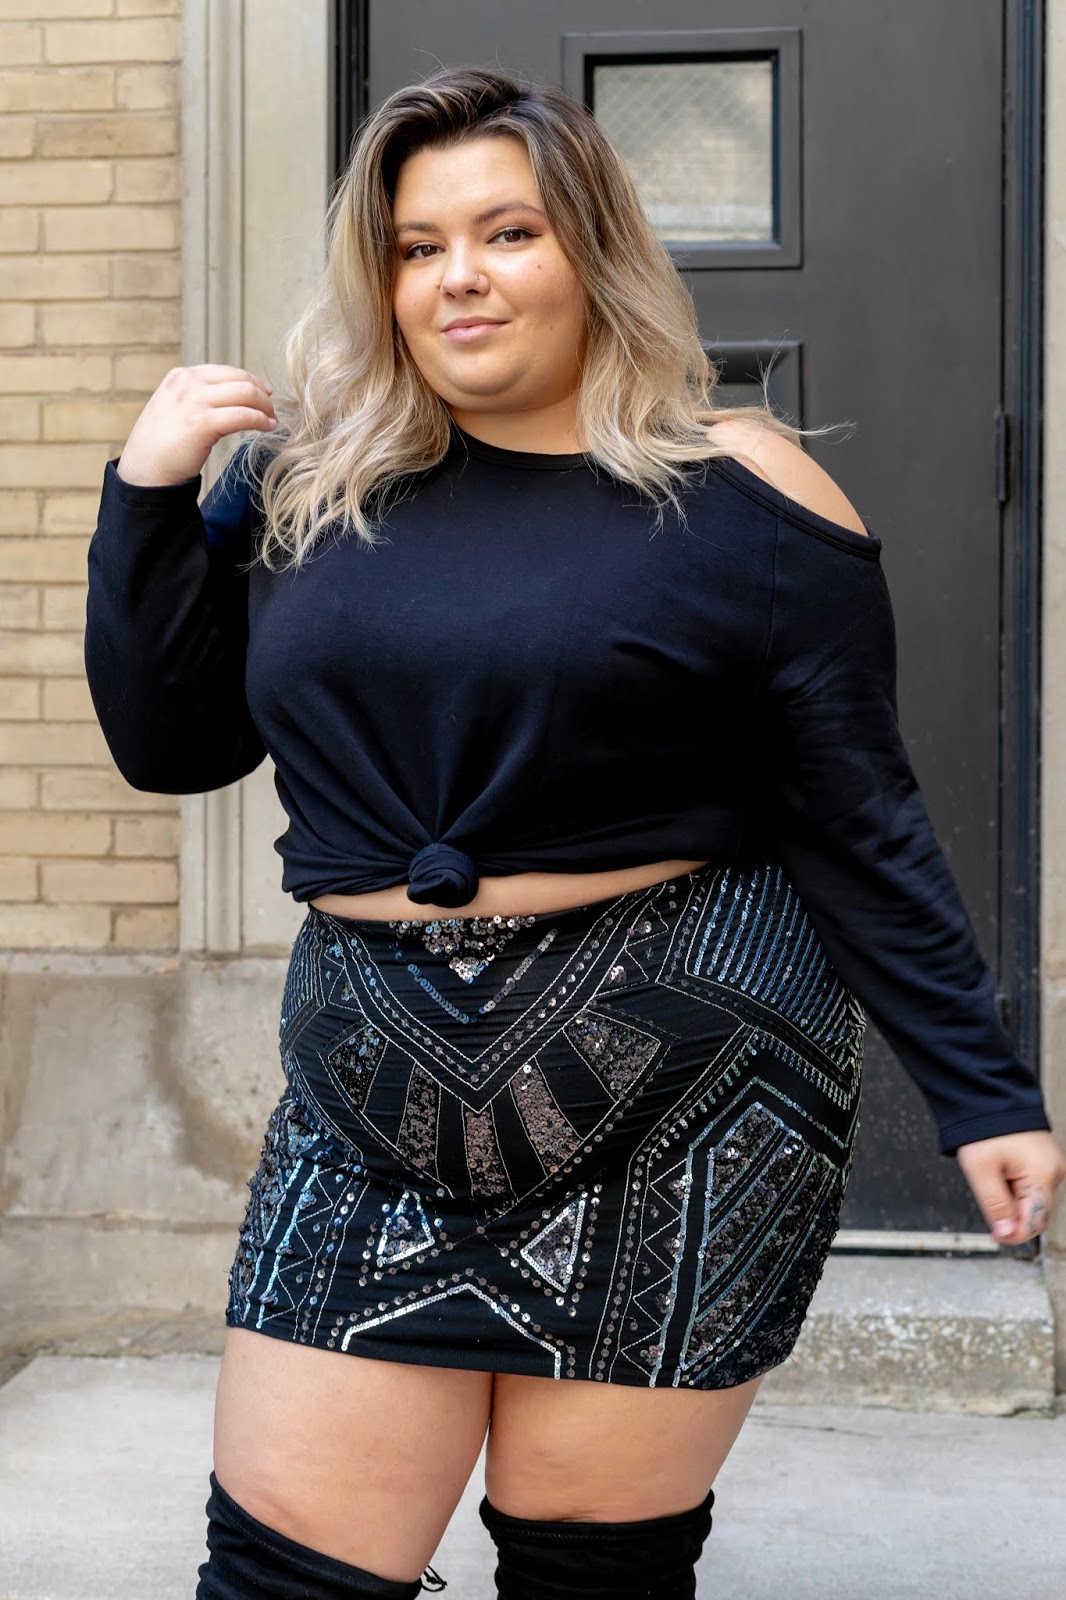 Chicago fashion blogger, Chicago plus size fashion blogger, natalie Craig, natalie in the city, plus size fashion, Chicago fashion, plus size fashion blogger, eff your beauty standards, fatshion, skorch magazine, Chicago model, plus size model, plus size petite, affordable plus size clothing, embrace your curves, plus model magazine, petite plus size, body positive, express plus sizes, sequin skirt, wide calf knee high suede boots, rebel Wilson x angels, cold shoulder